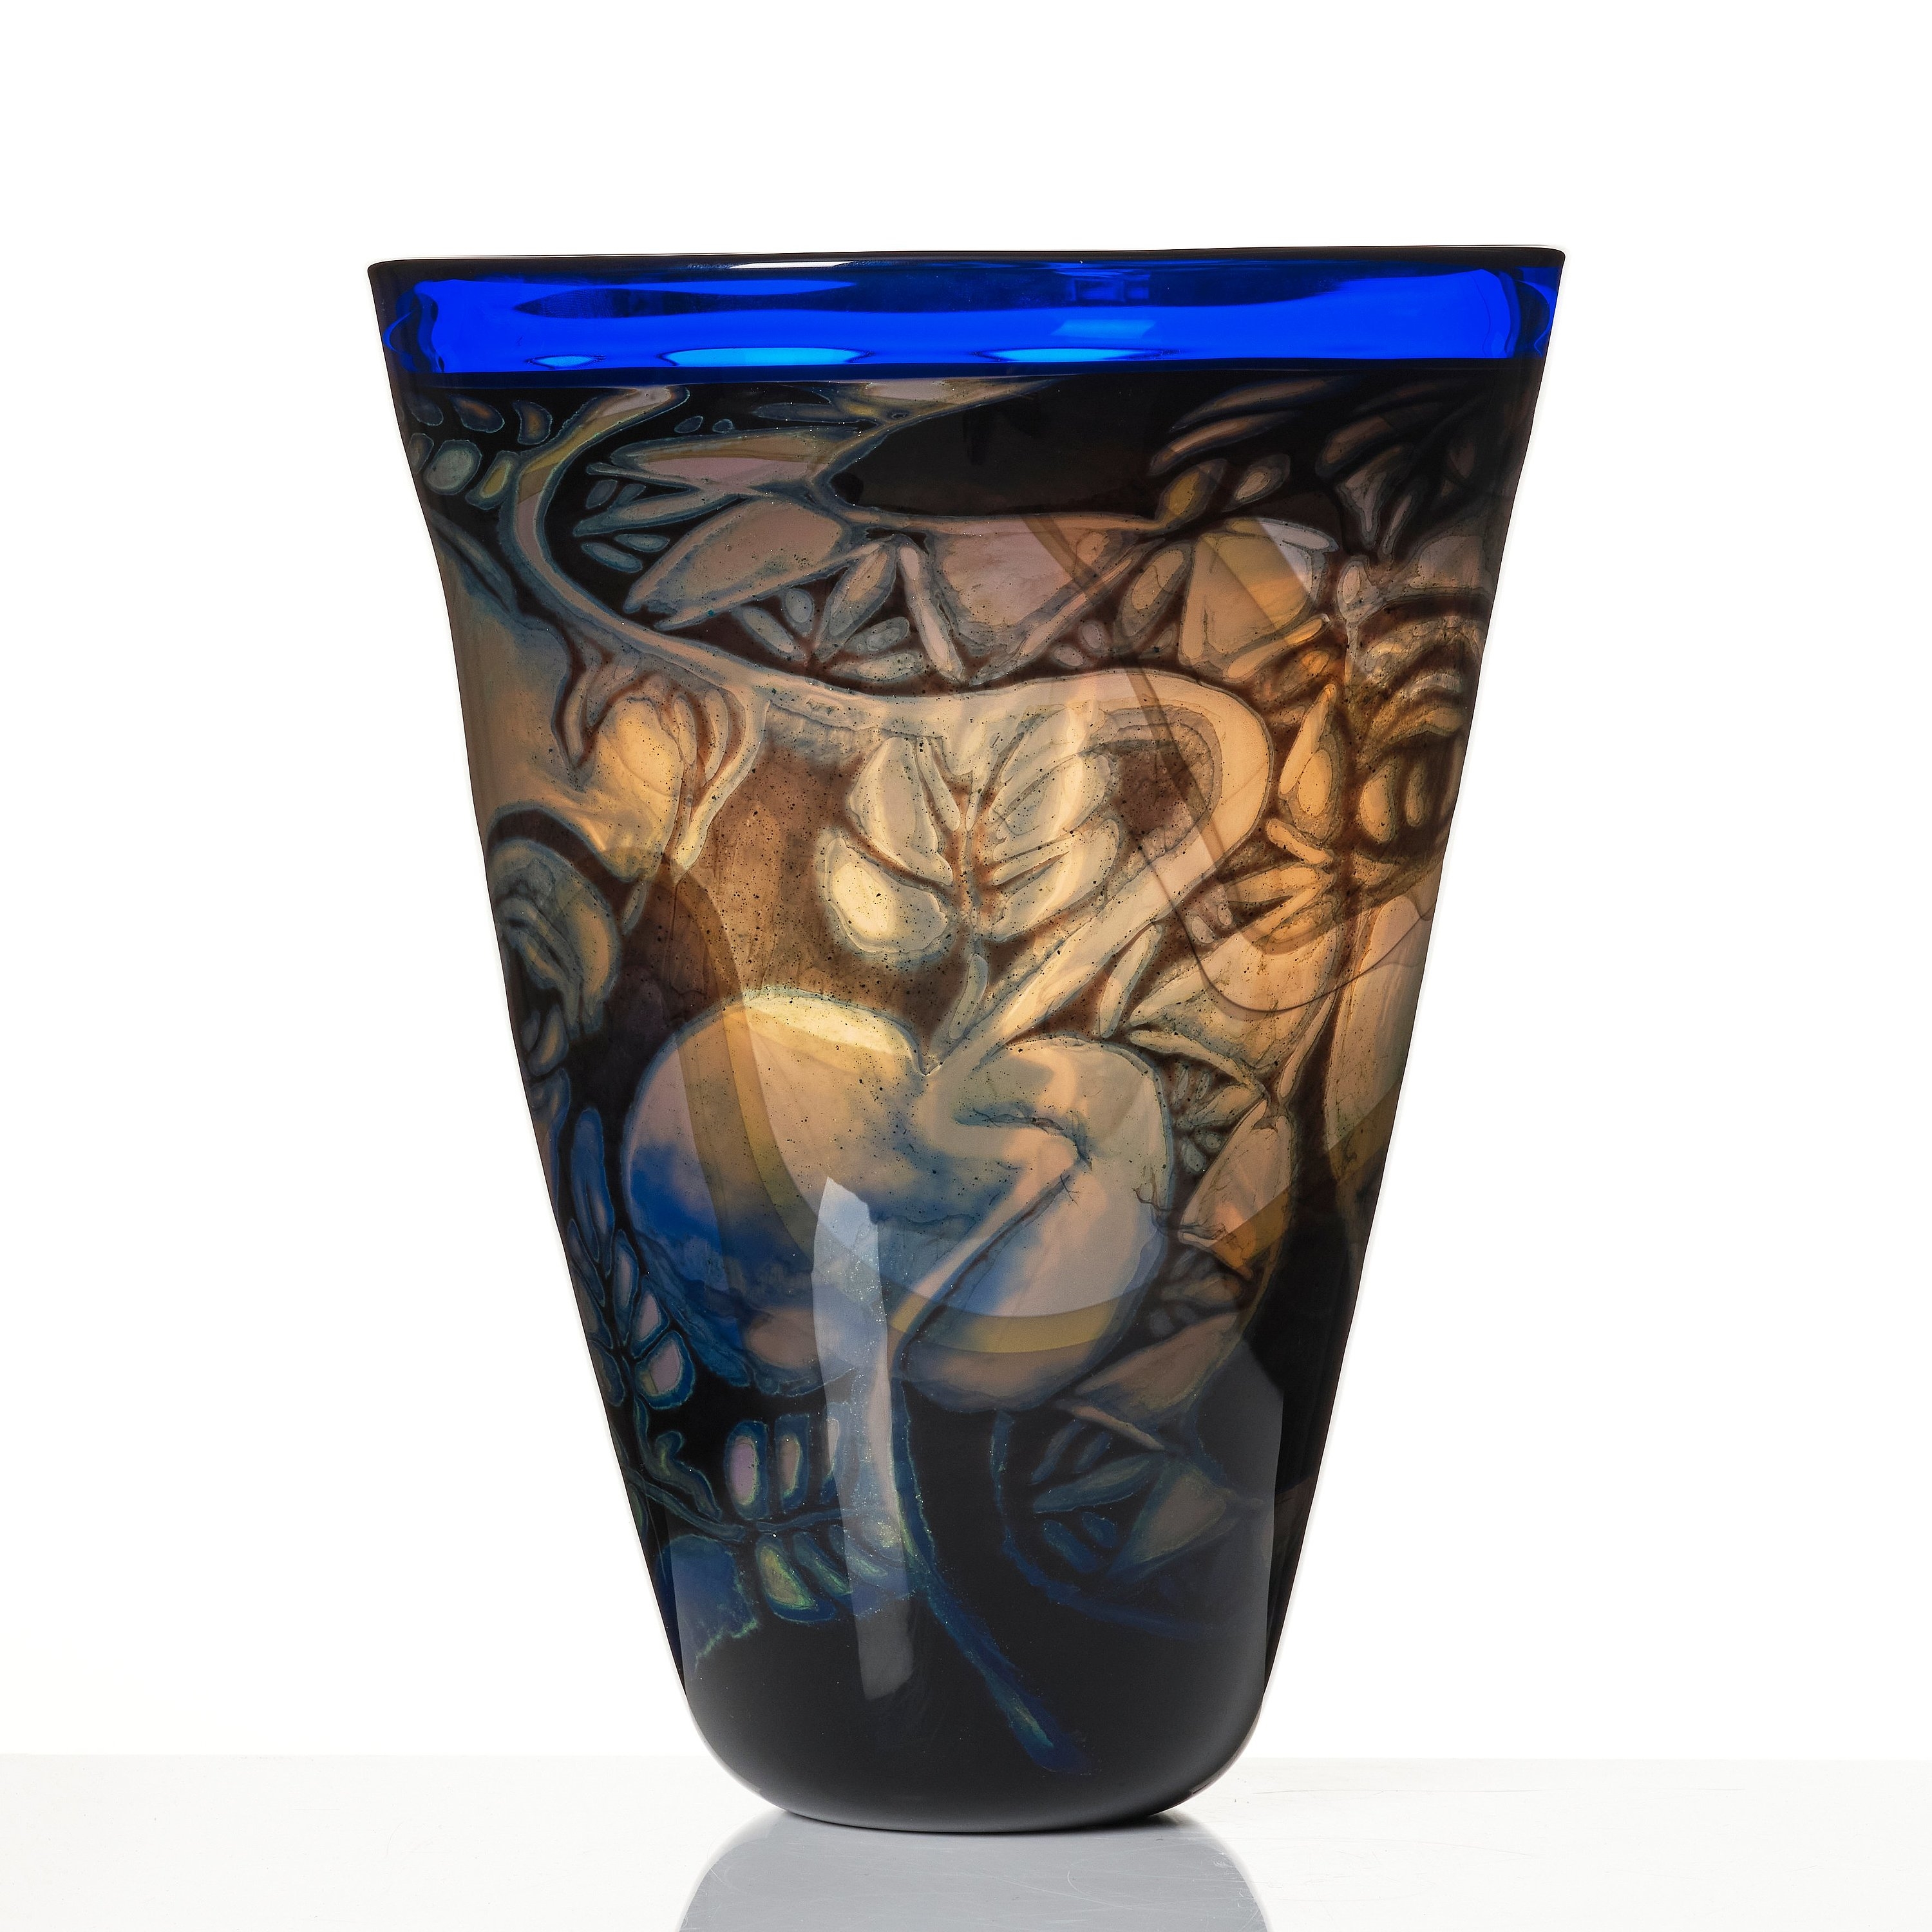 Artwork by Eva Englund, A 'graal' glass vase, Made of glass